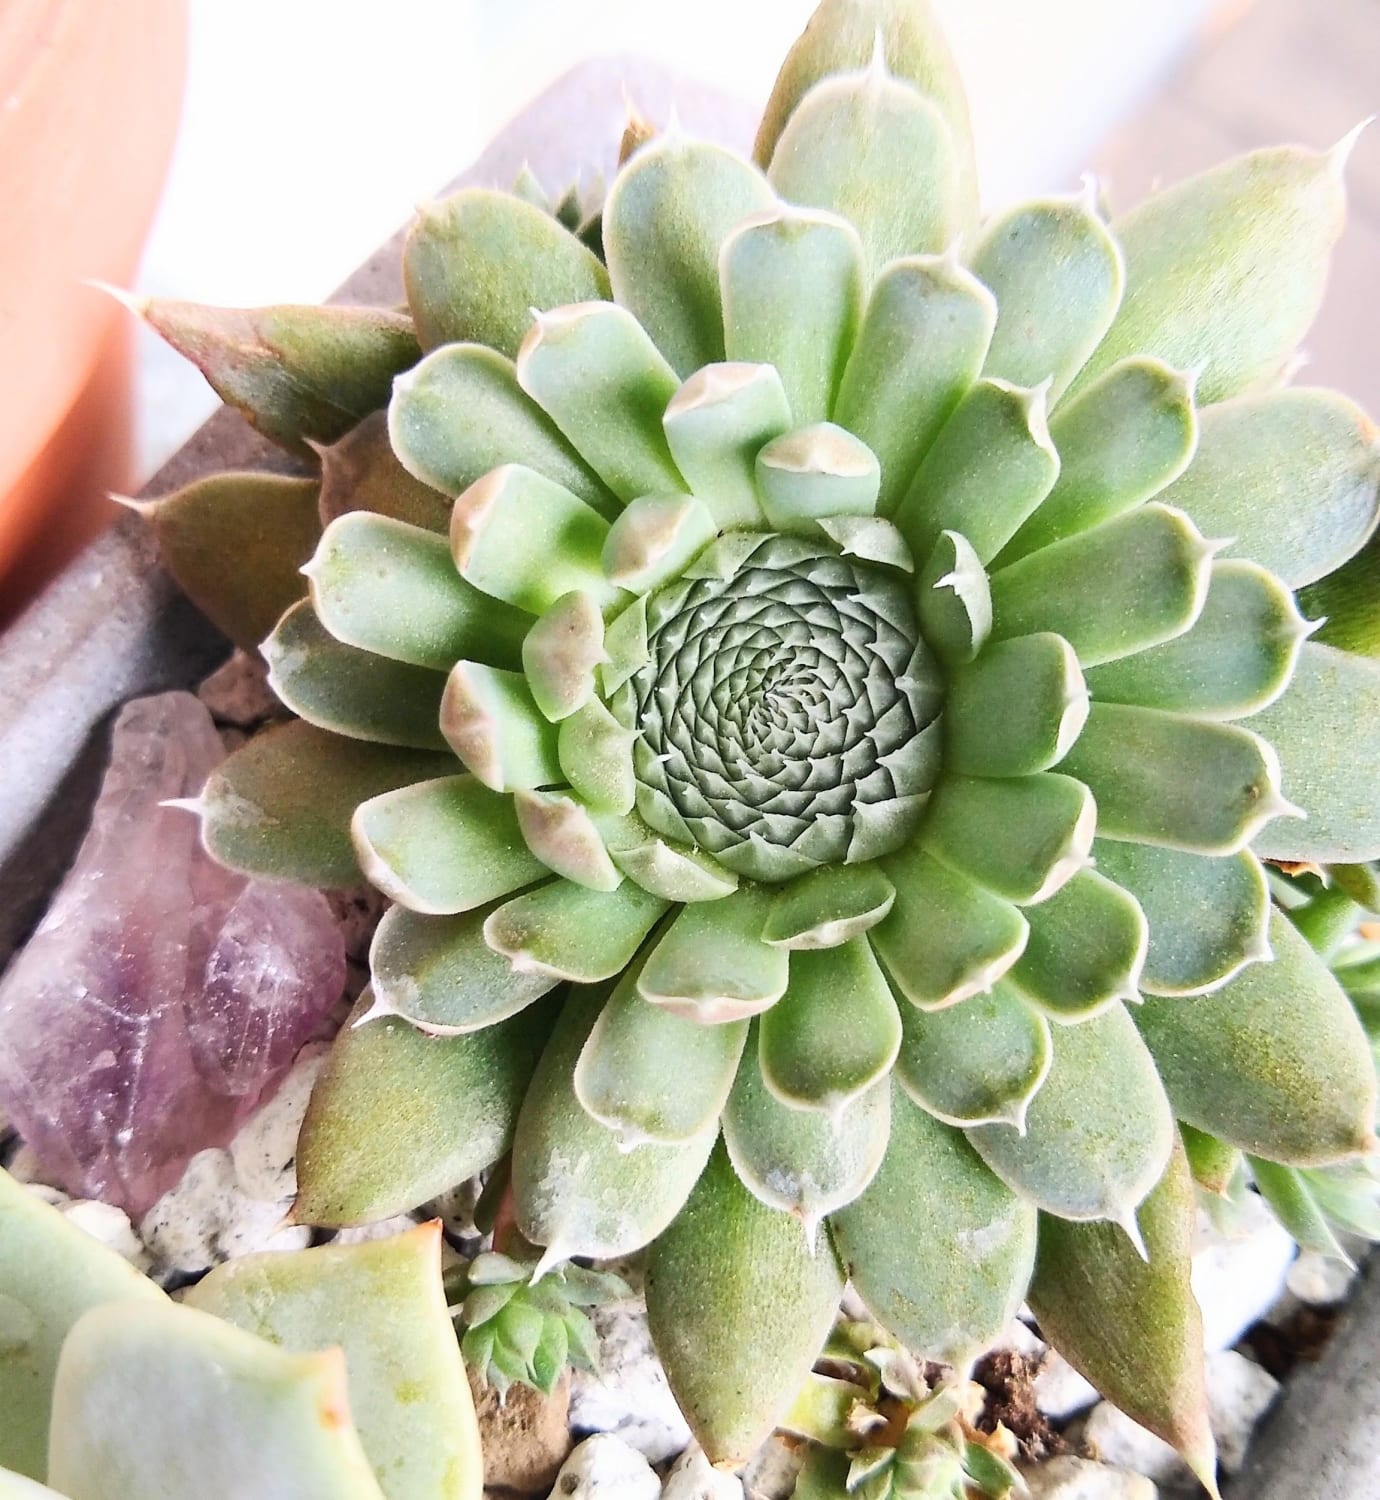 When I first got these Orostachys spinosa, they weren't displaying the central Fibonacci pattern but they've since opened up more, and I can't stop staring at them!